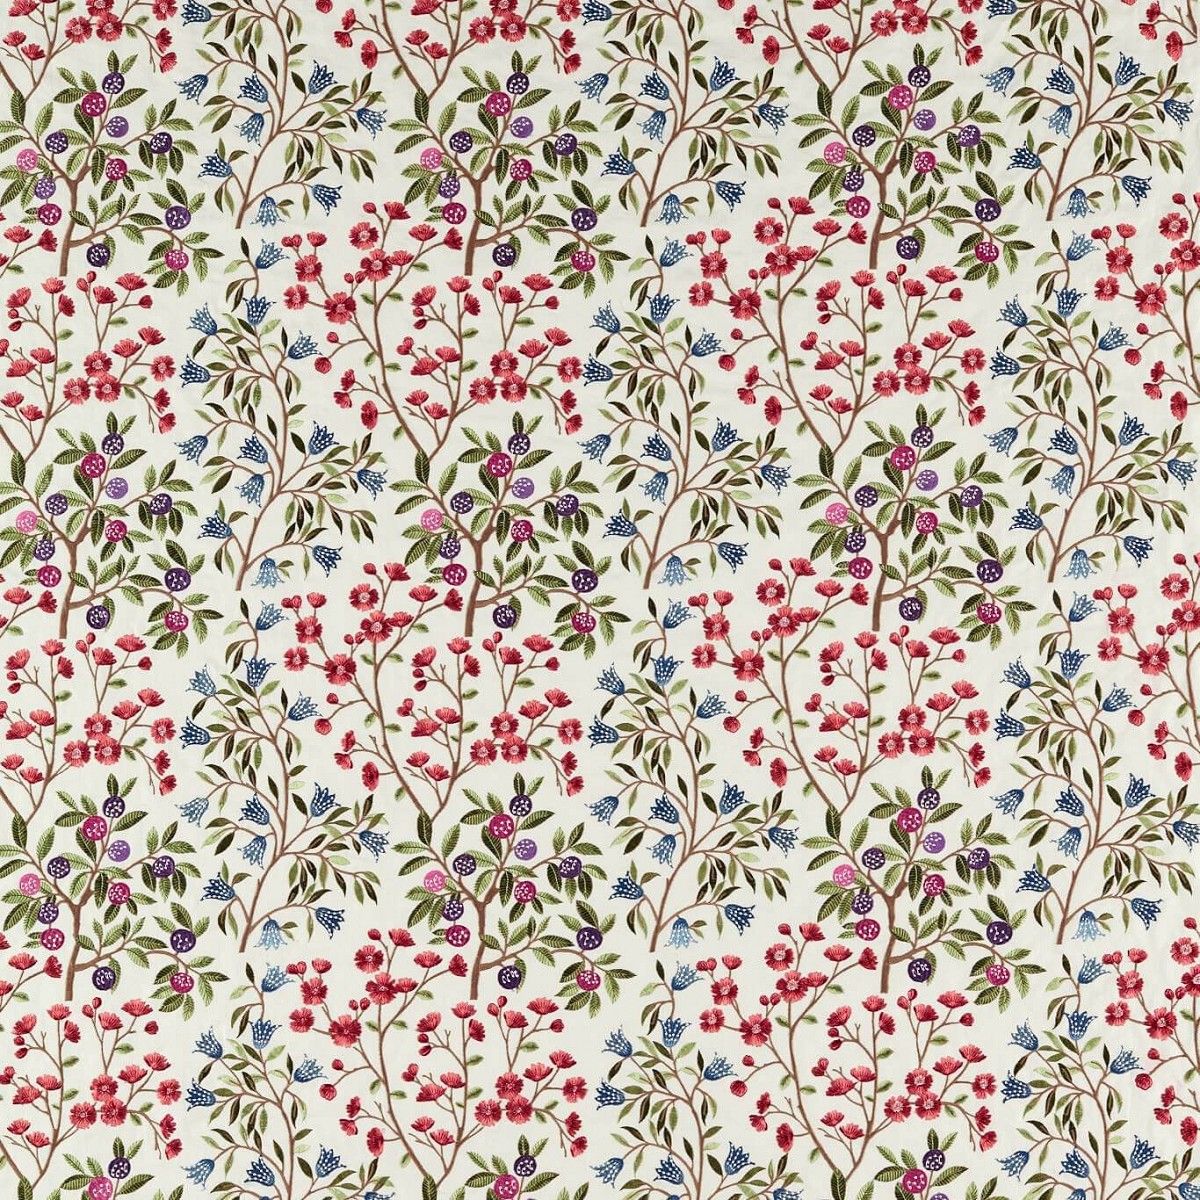 Foraging Embroidery Meadow Violet Fabric by Sanderson